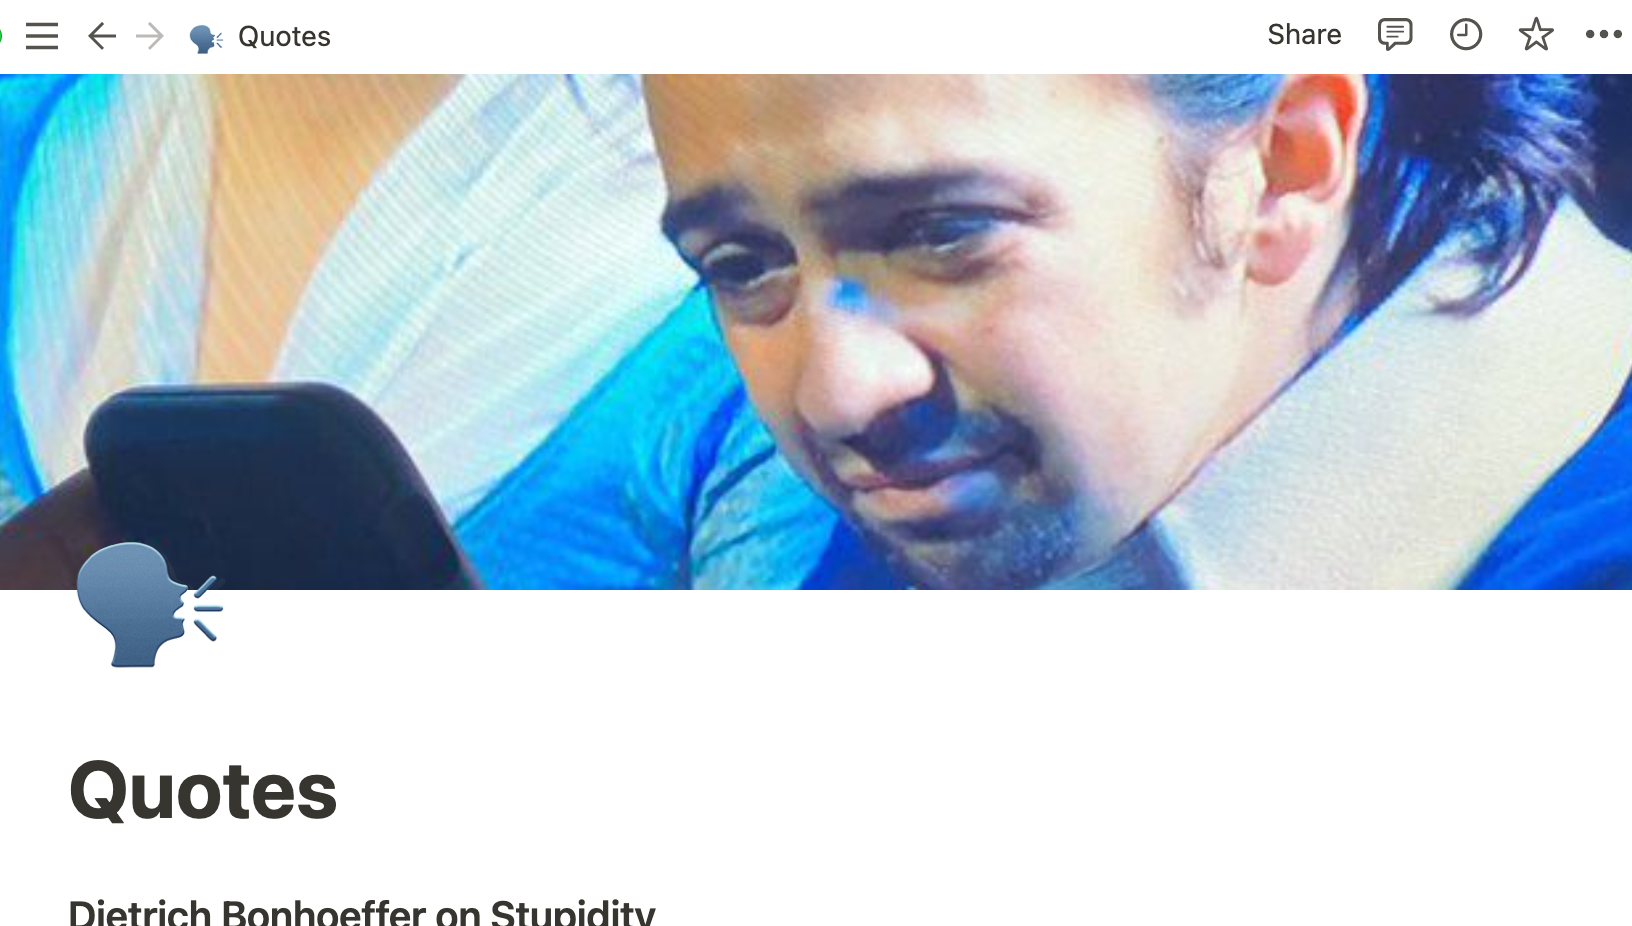 A Notion page labelled “Quotes” has a screengrab from Hamilton of Lin Manuel Miranda looking down in the screenshot with someone in front of the tv holding up a phone making it look like Miranda is looking out of the video on to someone’s phone.